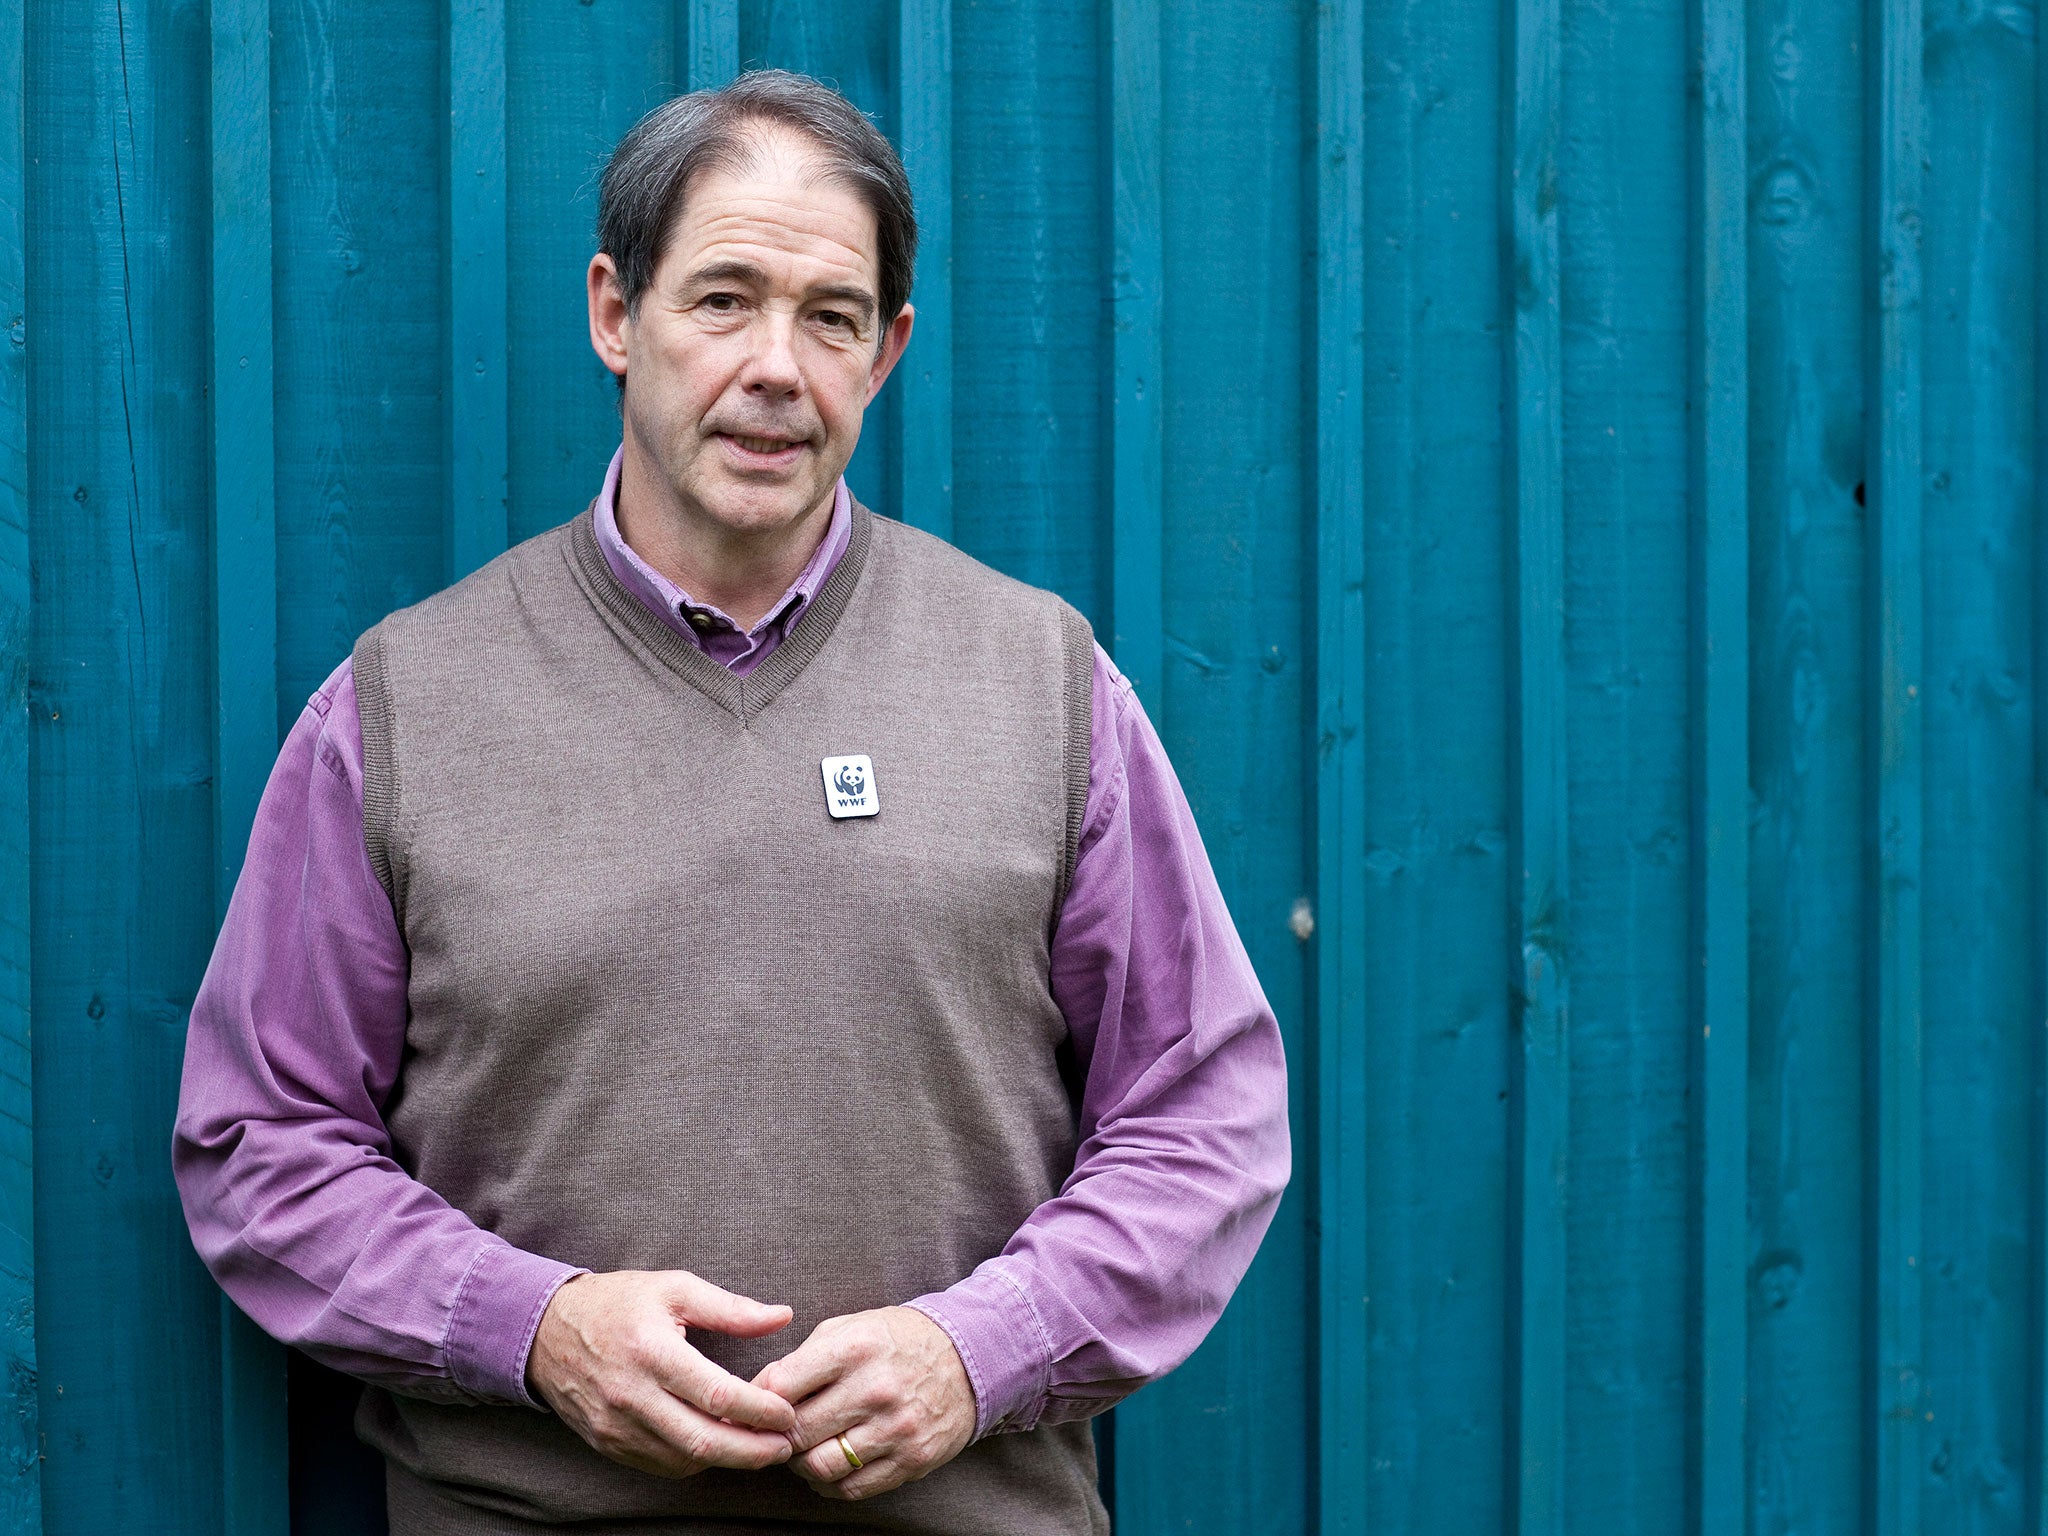 'Prosperity needs to be generated in ways which protect the natural world rather than destroy it,' says Sir Jonathon Porritt